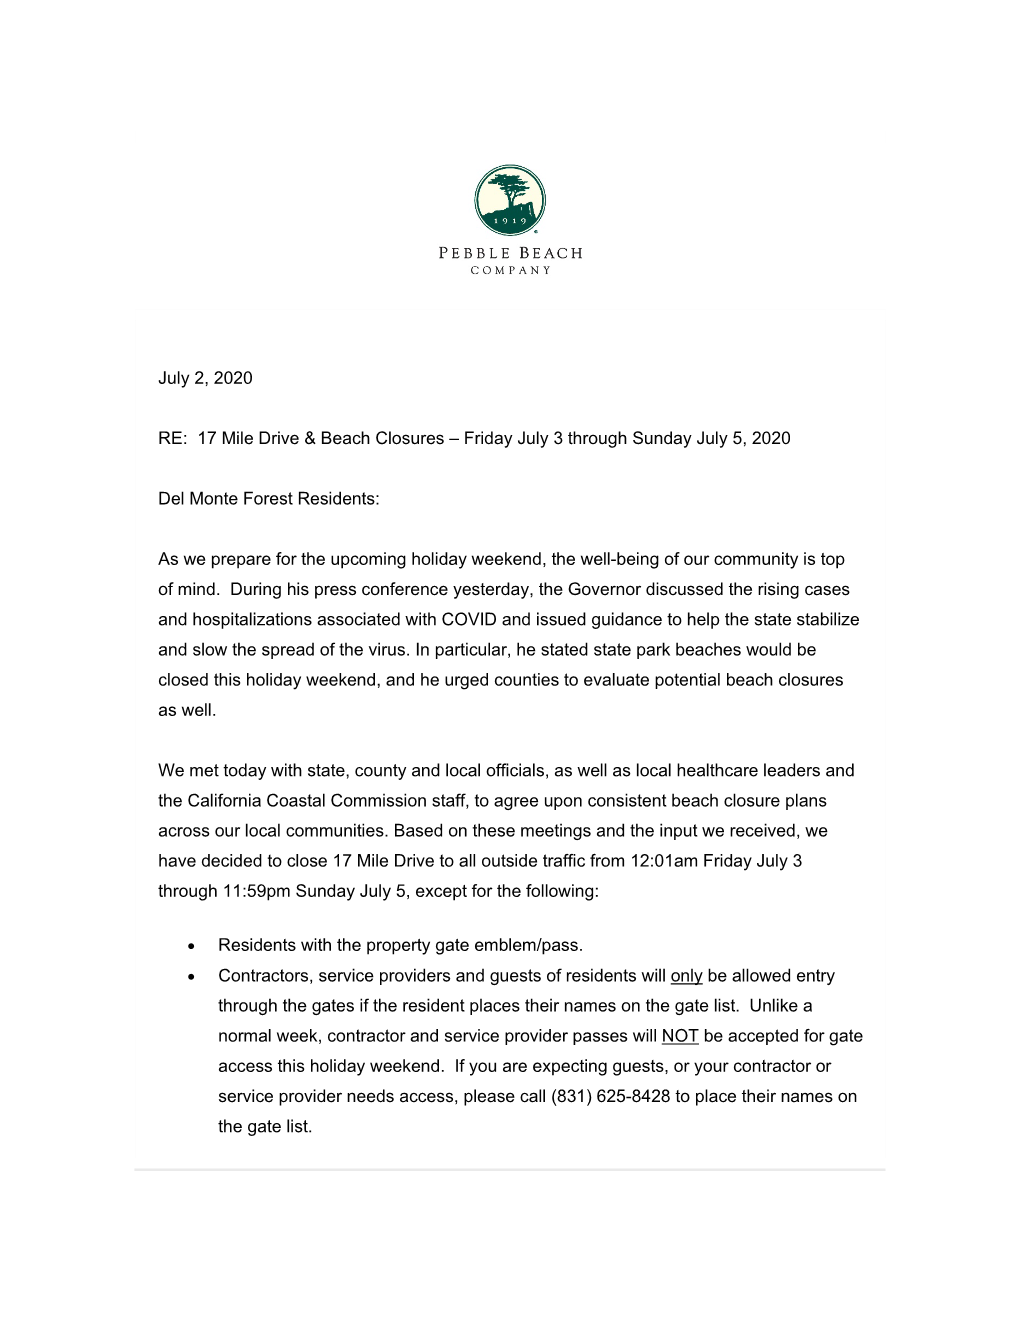 July 2, 2020 RE: 17 Mile Drive & Beach Closures – Friday July 3 Through Sunday July 5, 2020 Del Monte Forest Residents